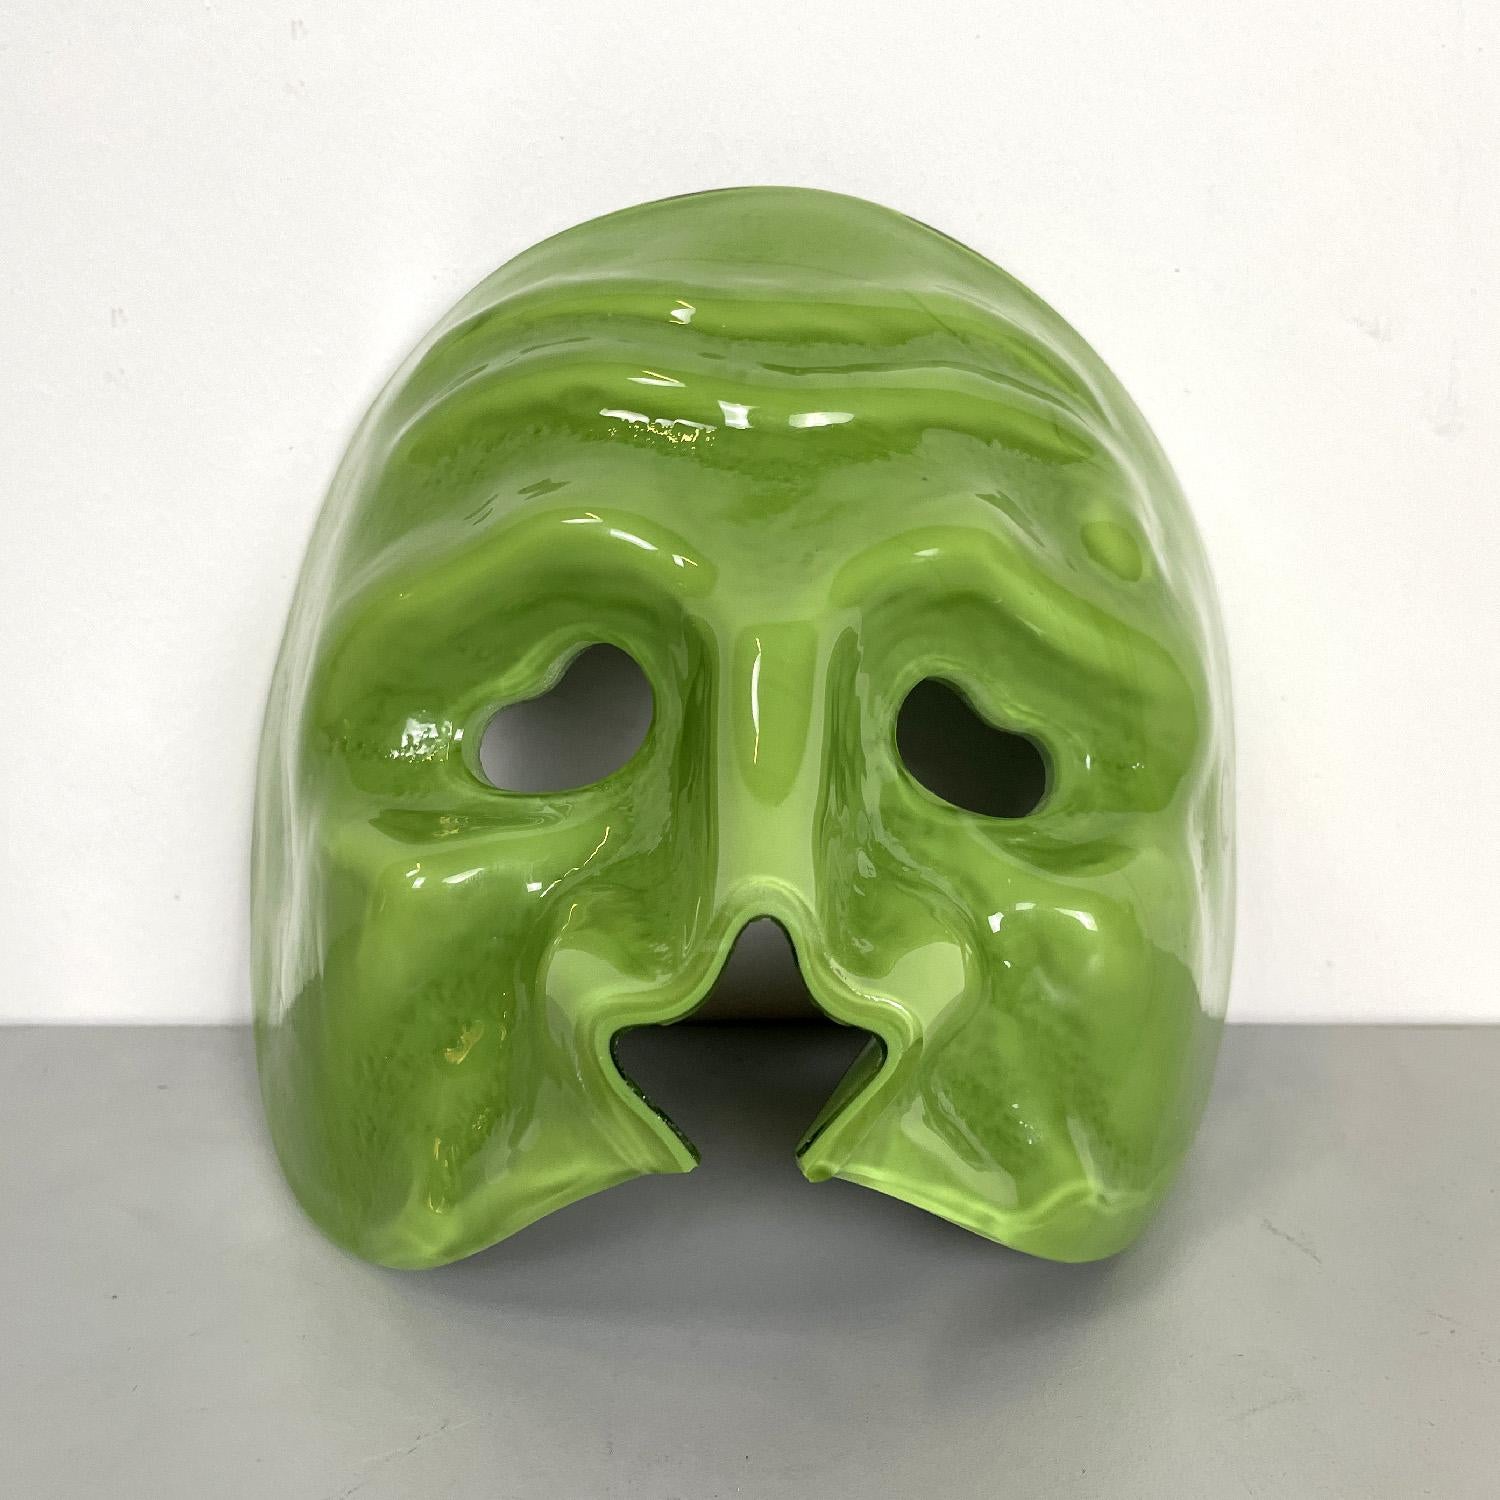 Italian Venetian style mask sculpture in green Murano glass by Venini, 1990s
Green Murano glass sculpture. It represents a Venetian-inspired mask, with facial details and a cut nose.
Produced by Venini in 1990s. Label present.
Very good